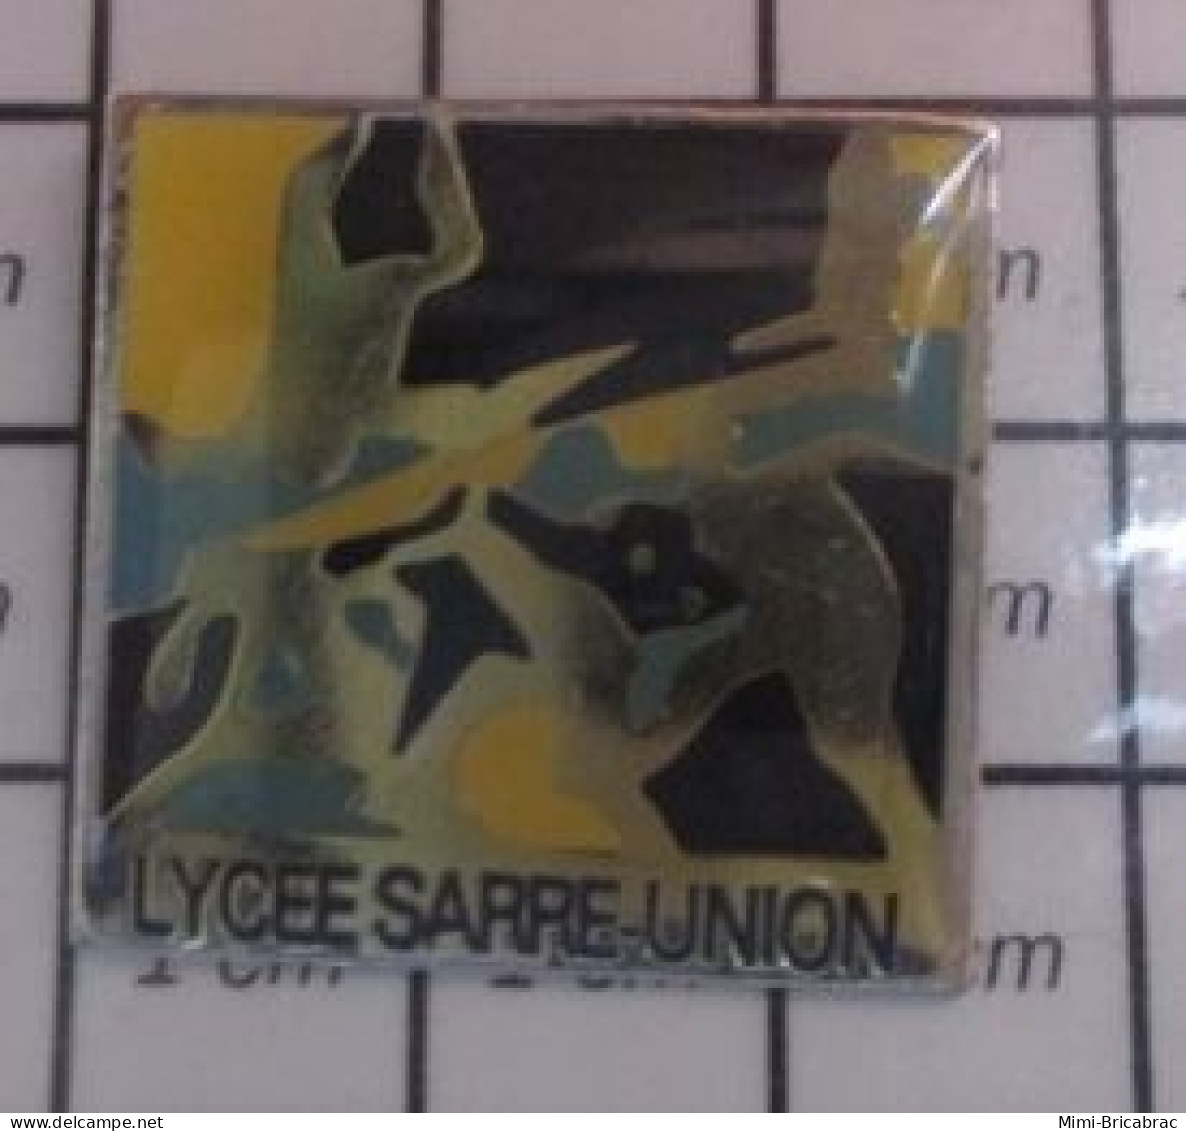 713c Pin's Pins / Beau Et Rare / ADMINISTRATIONS / LYCEE SARRE UNION - Administration